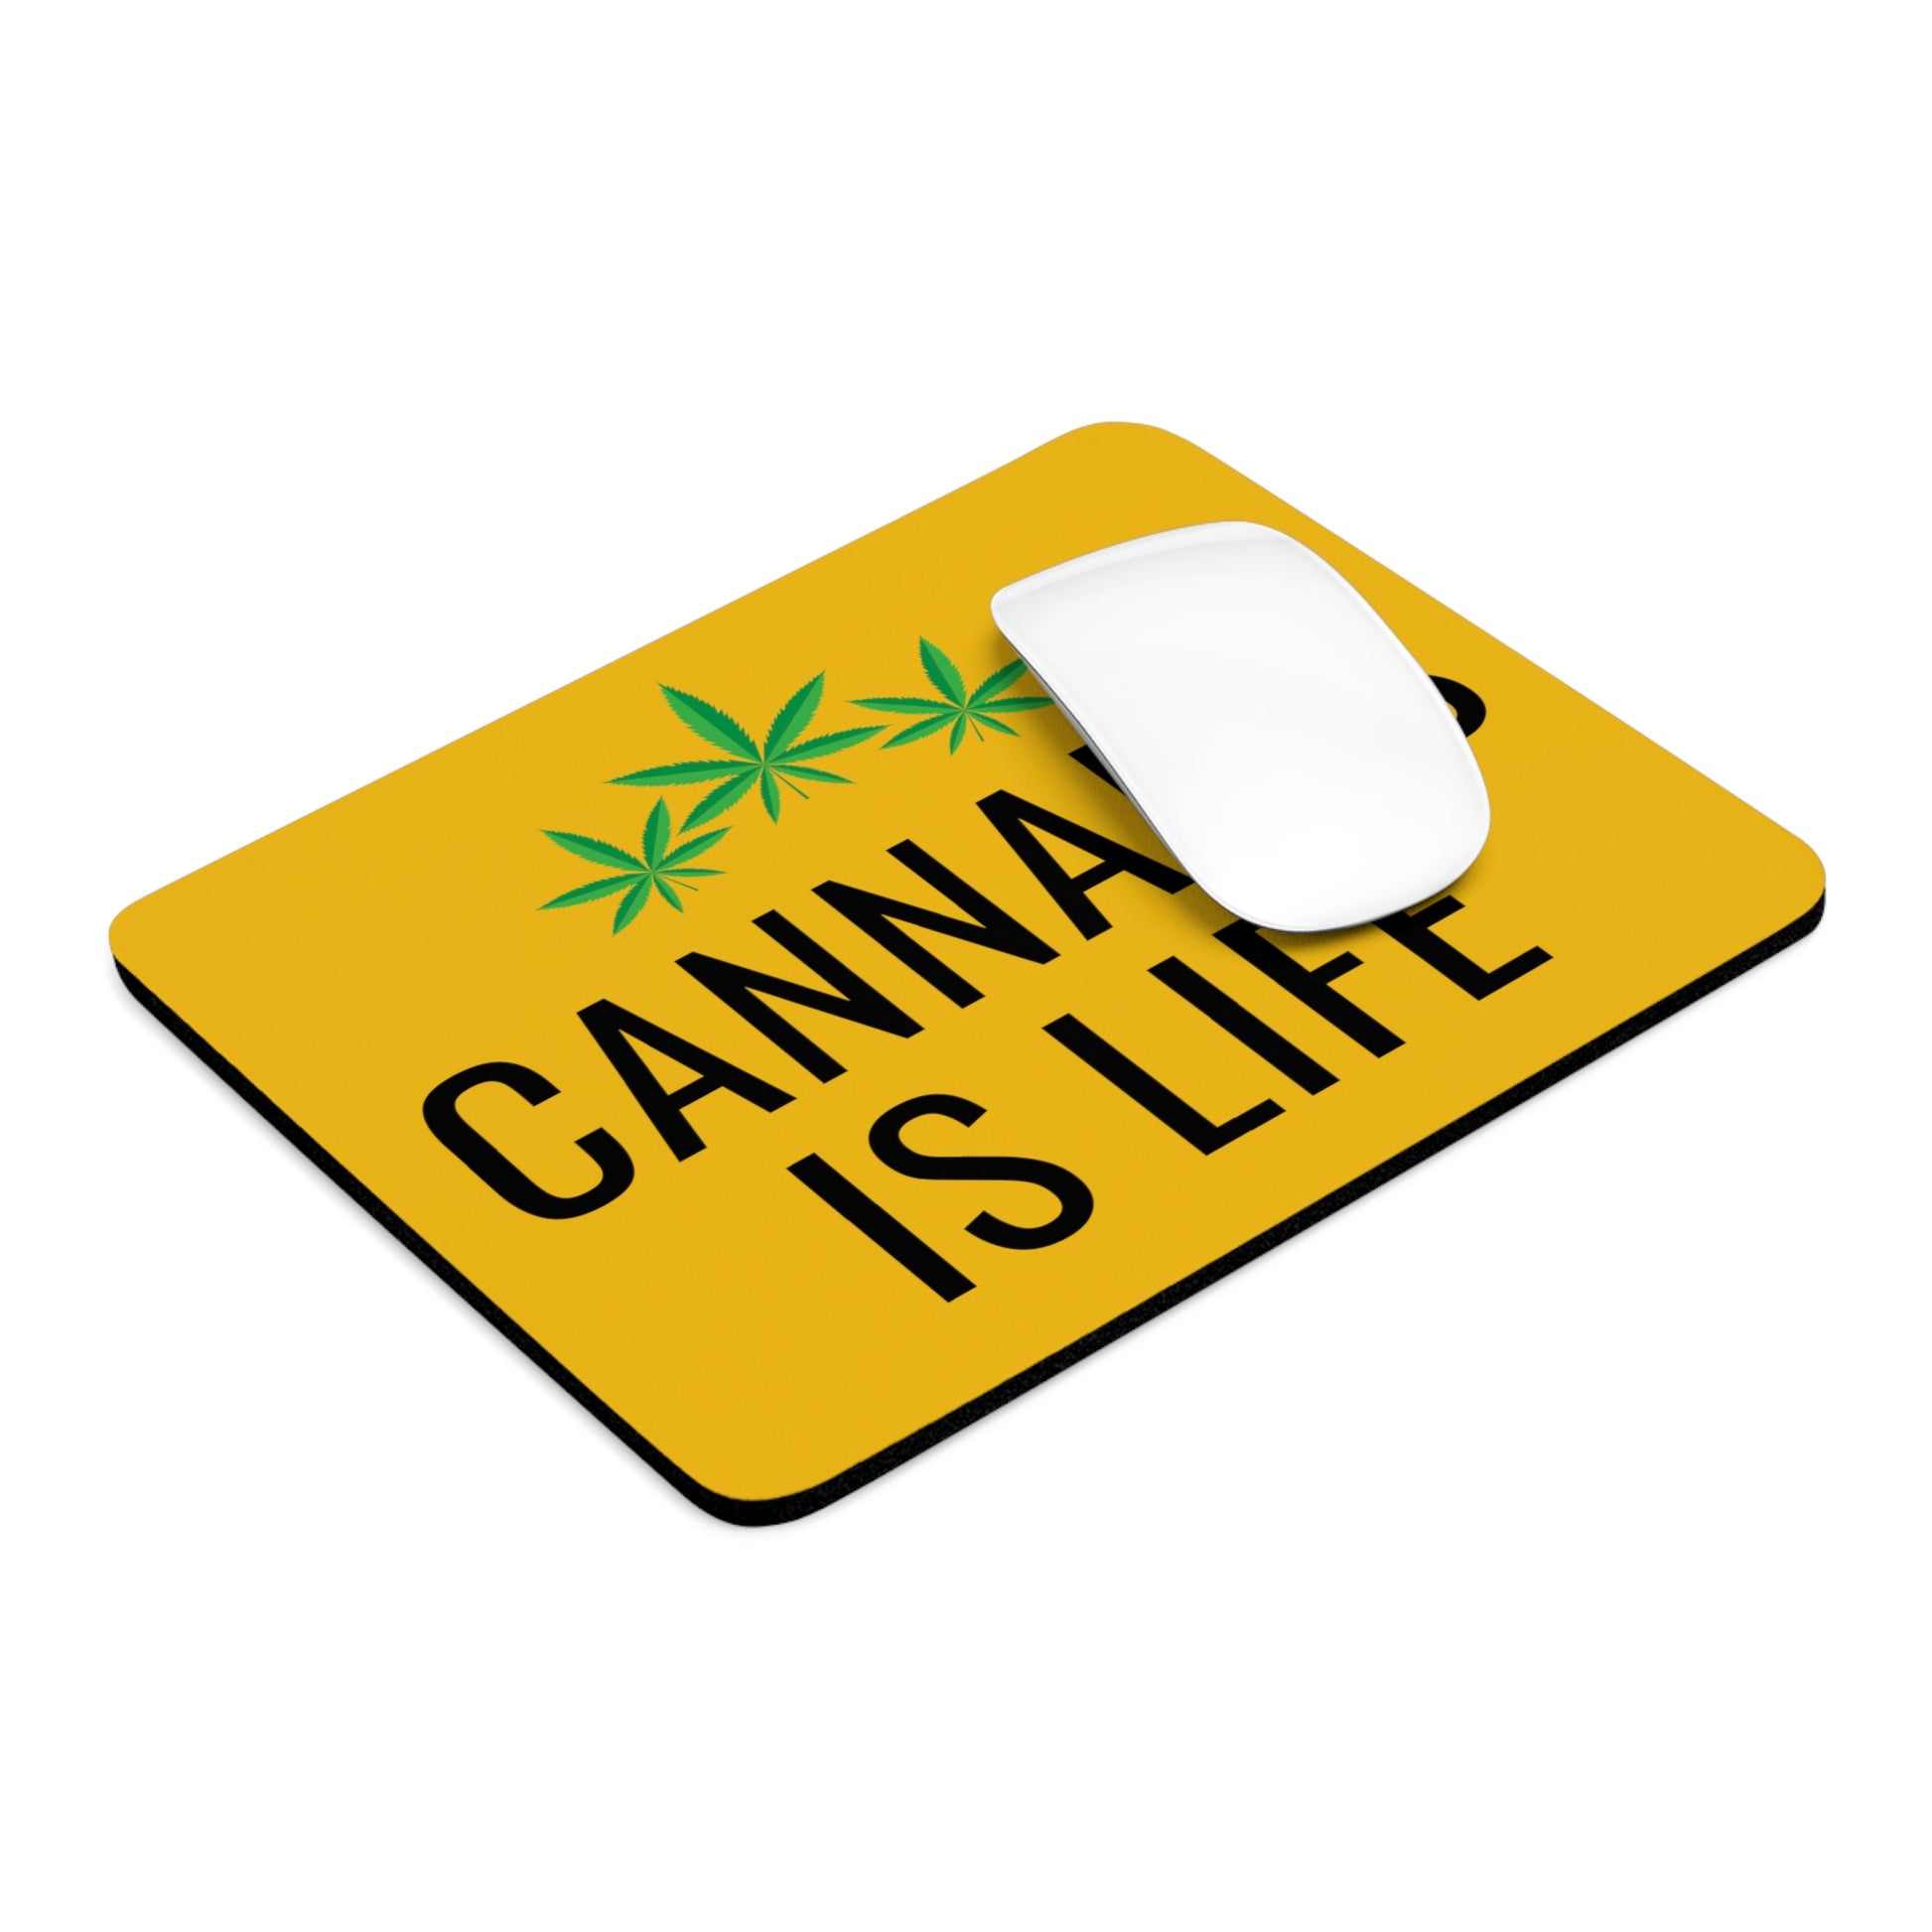 Cannabis is Life Mouse Pad is the product name.